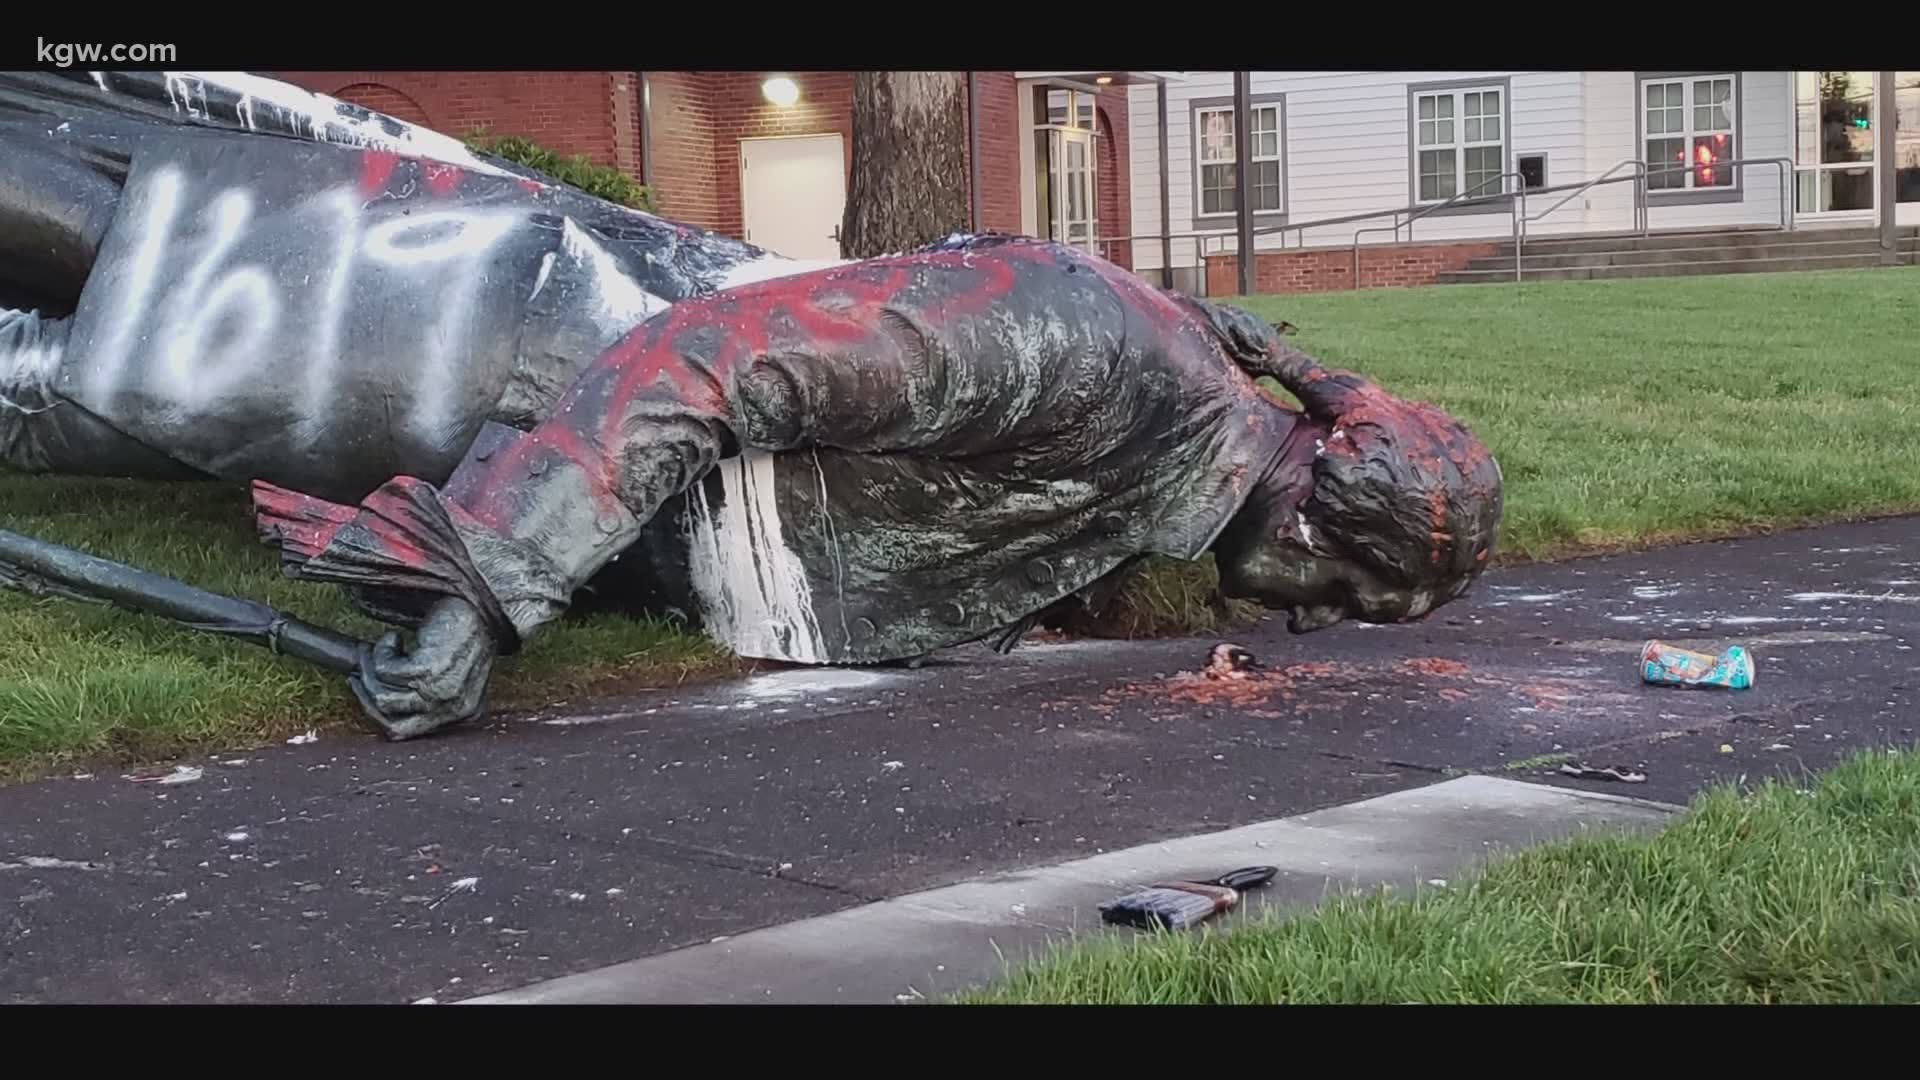 A long standing statue of George Washington was toppled and spray painted Thursday night.